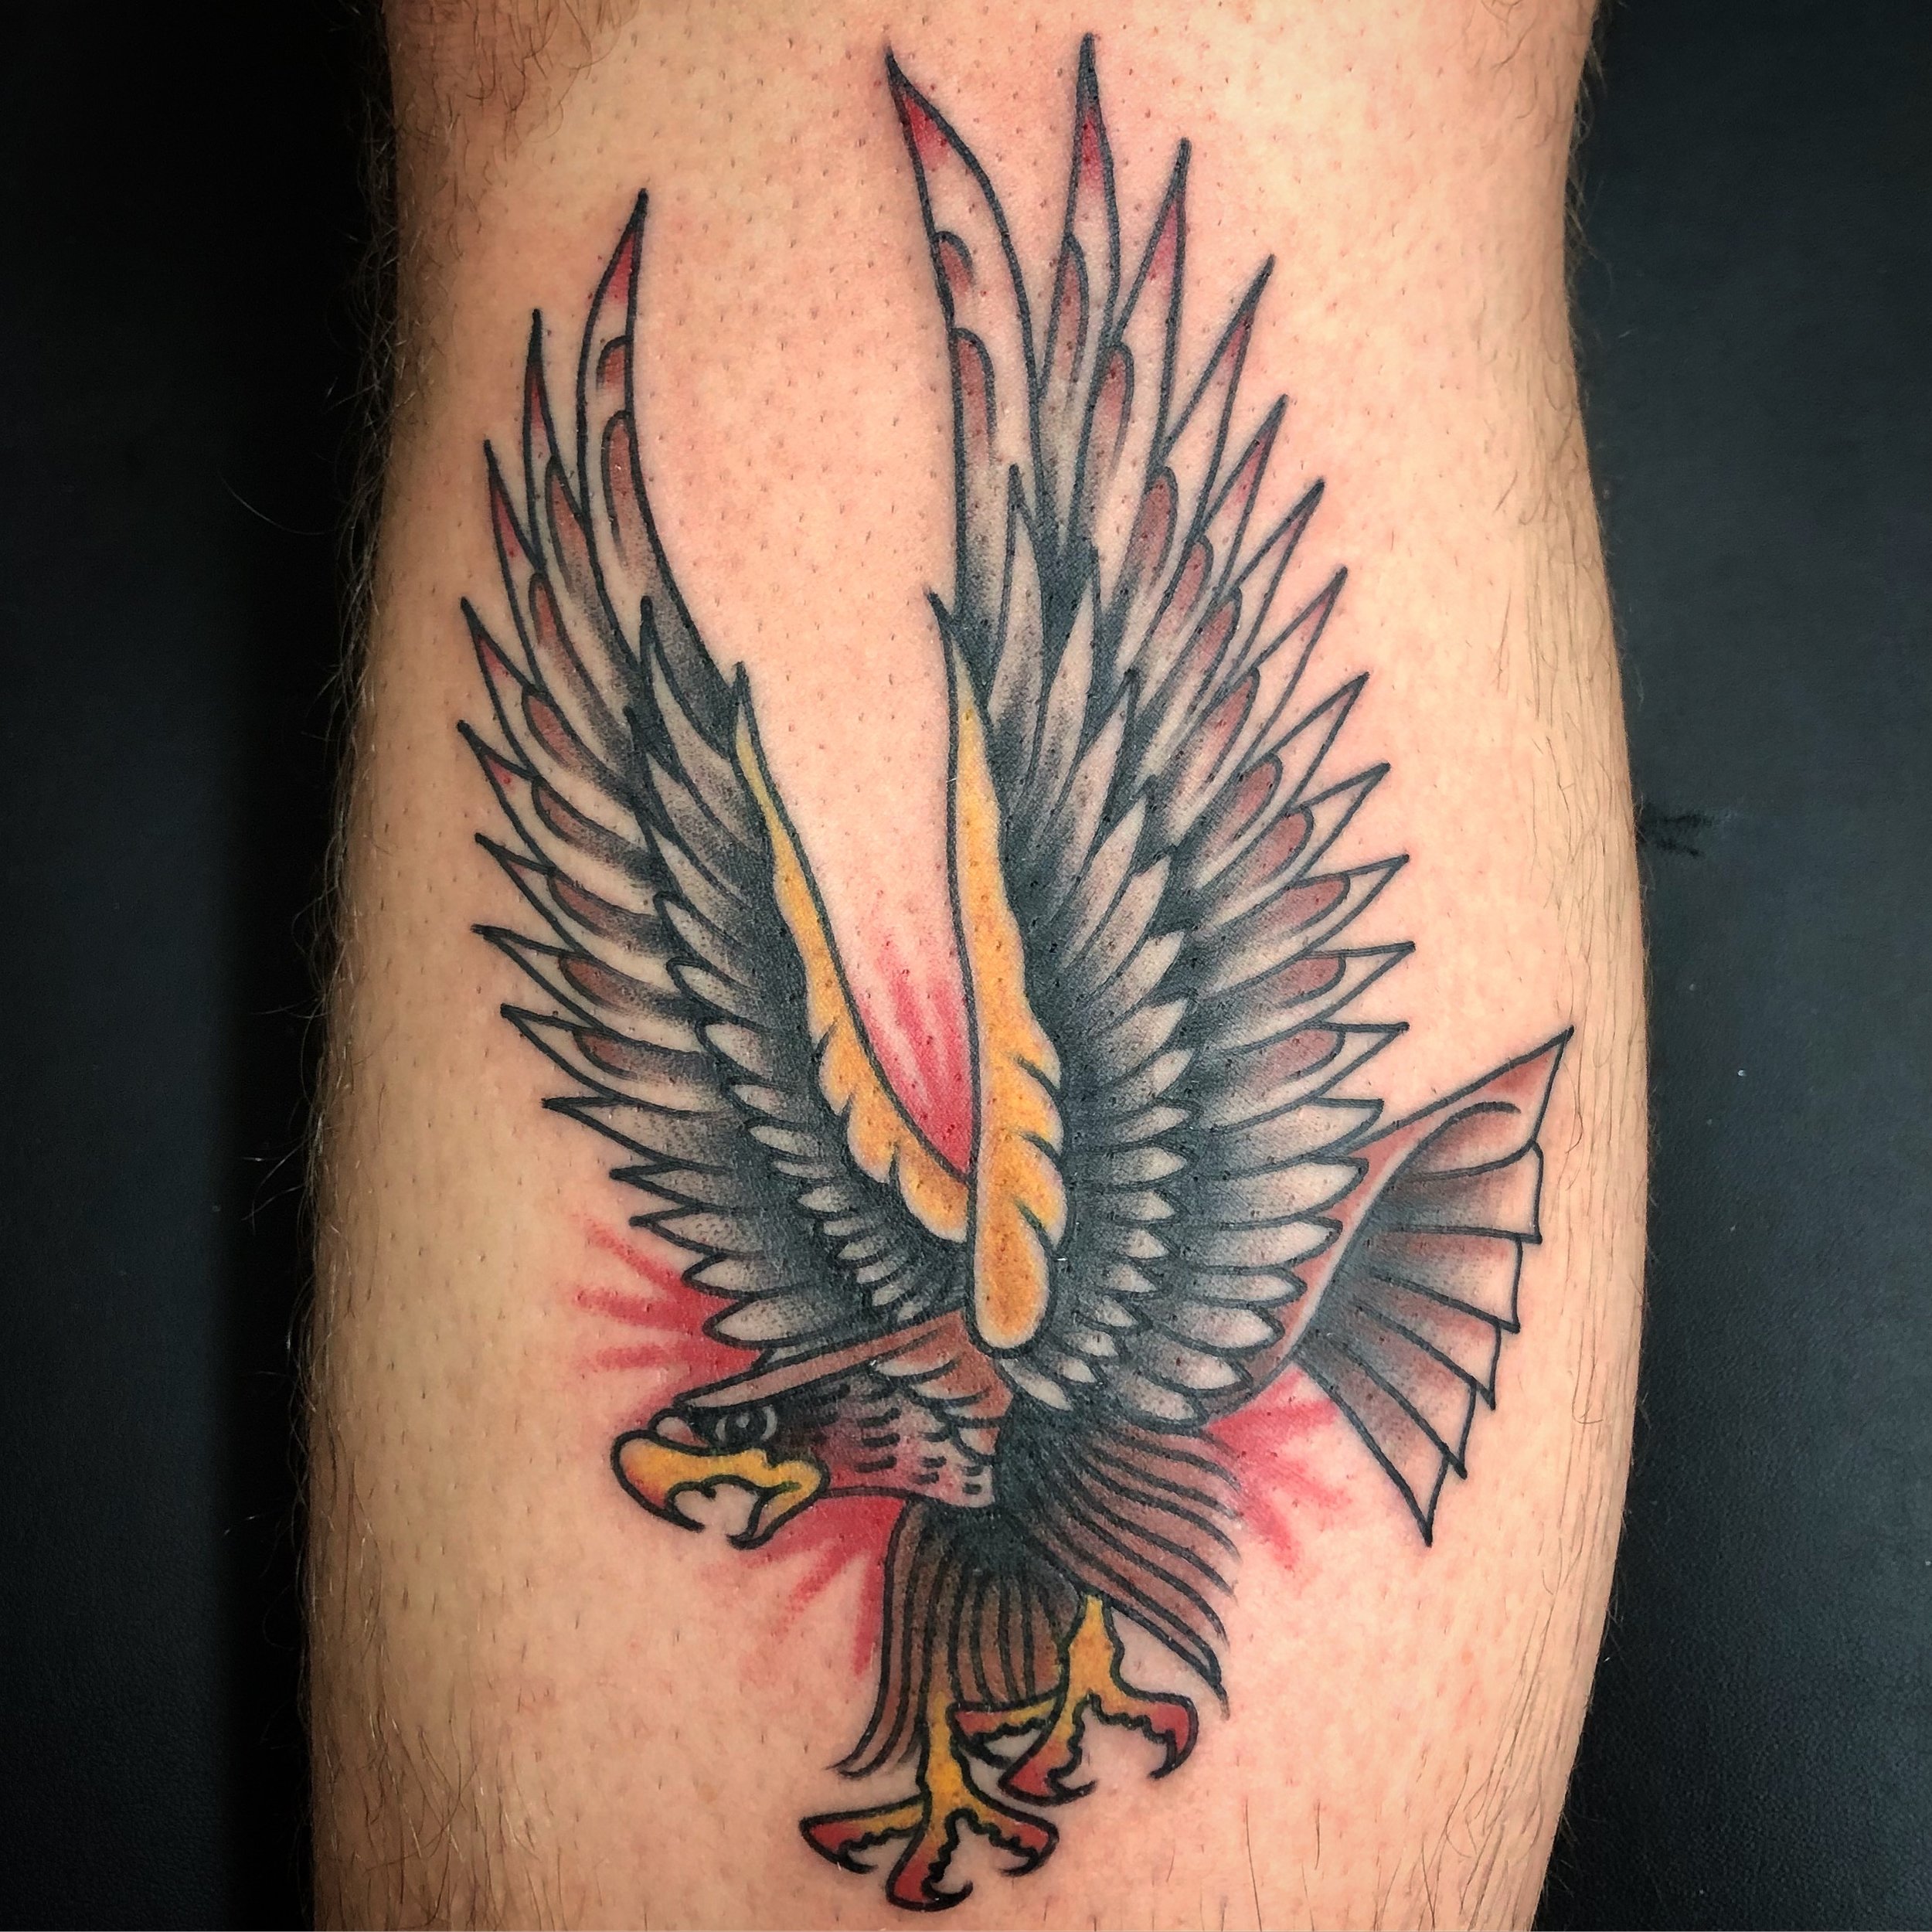 photo tattoo griffin 04032019 197  idea for drawing a tattoo with a  griffin  tattoovaluenet  tattoovaluenet